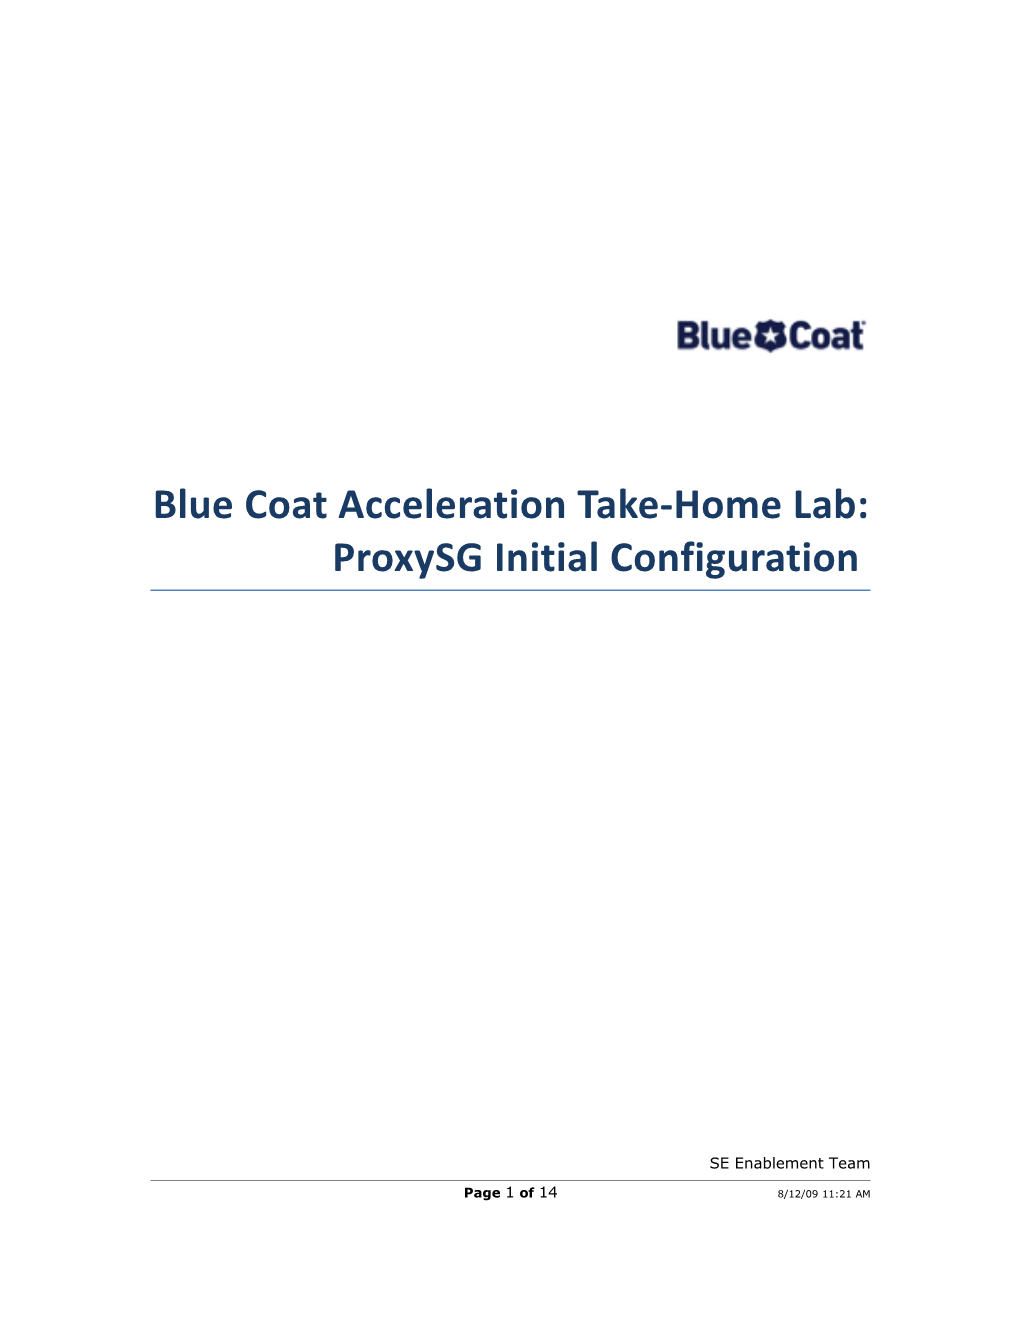 Blue Coat Acceleration Take-Home Lab: Proxysg Initial Configuration